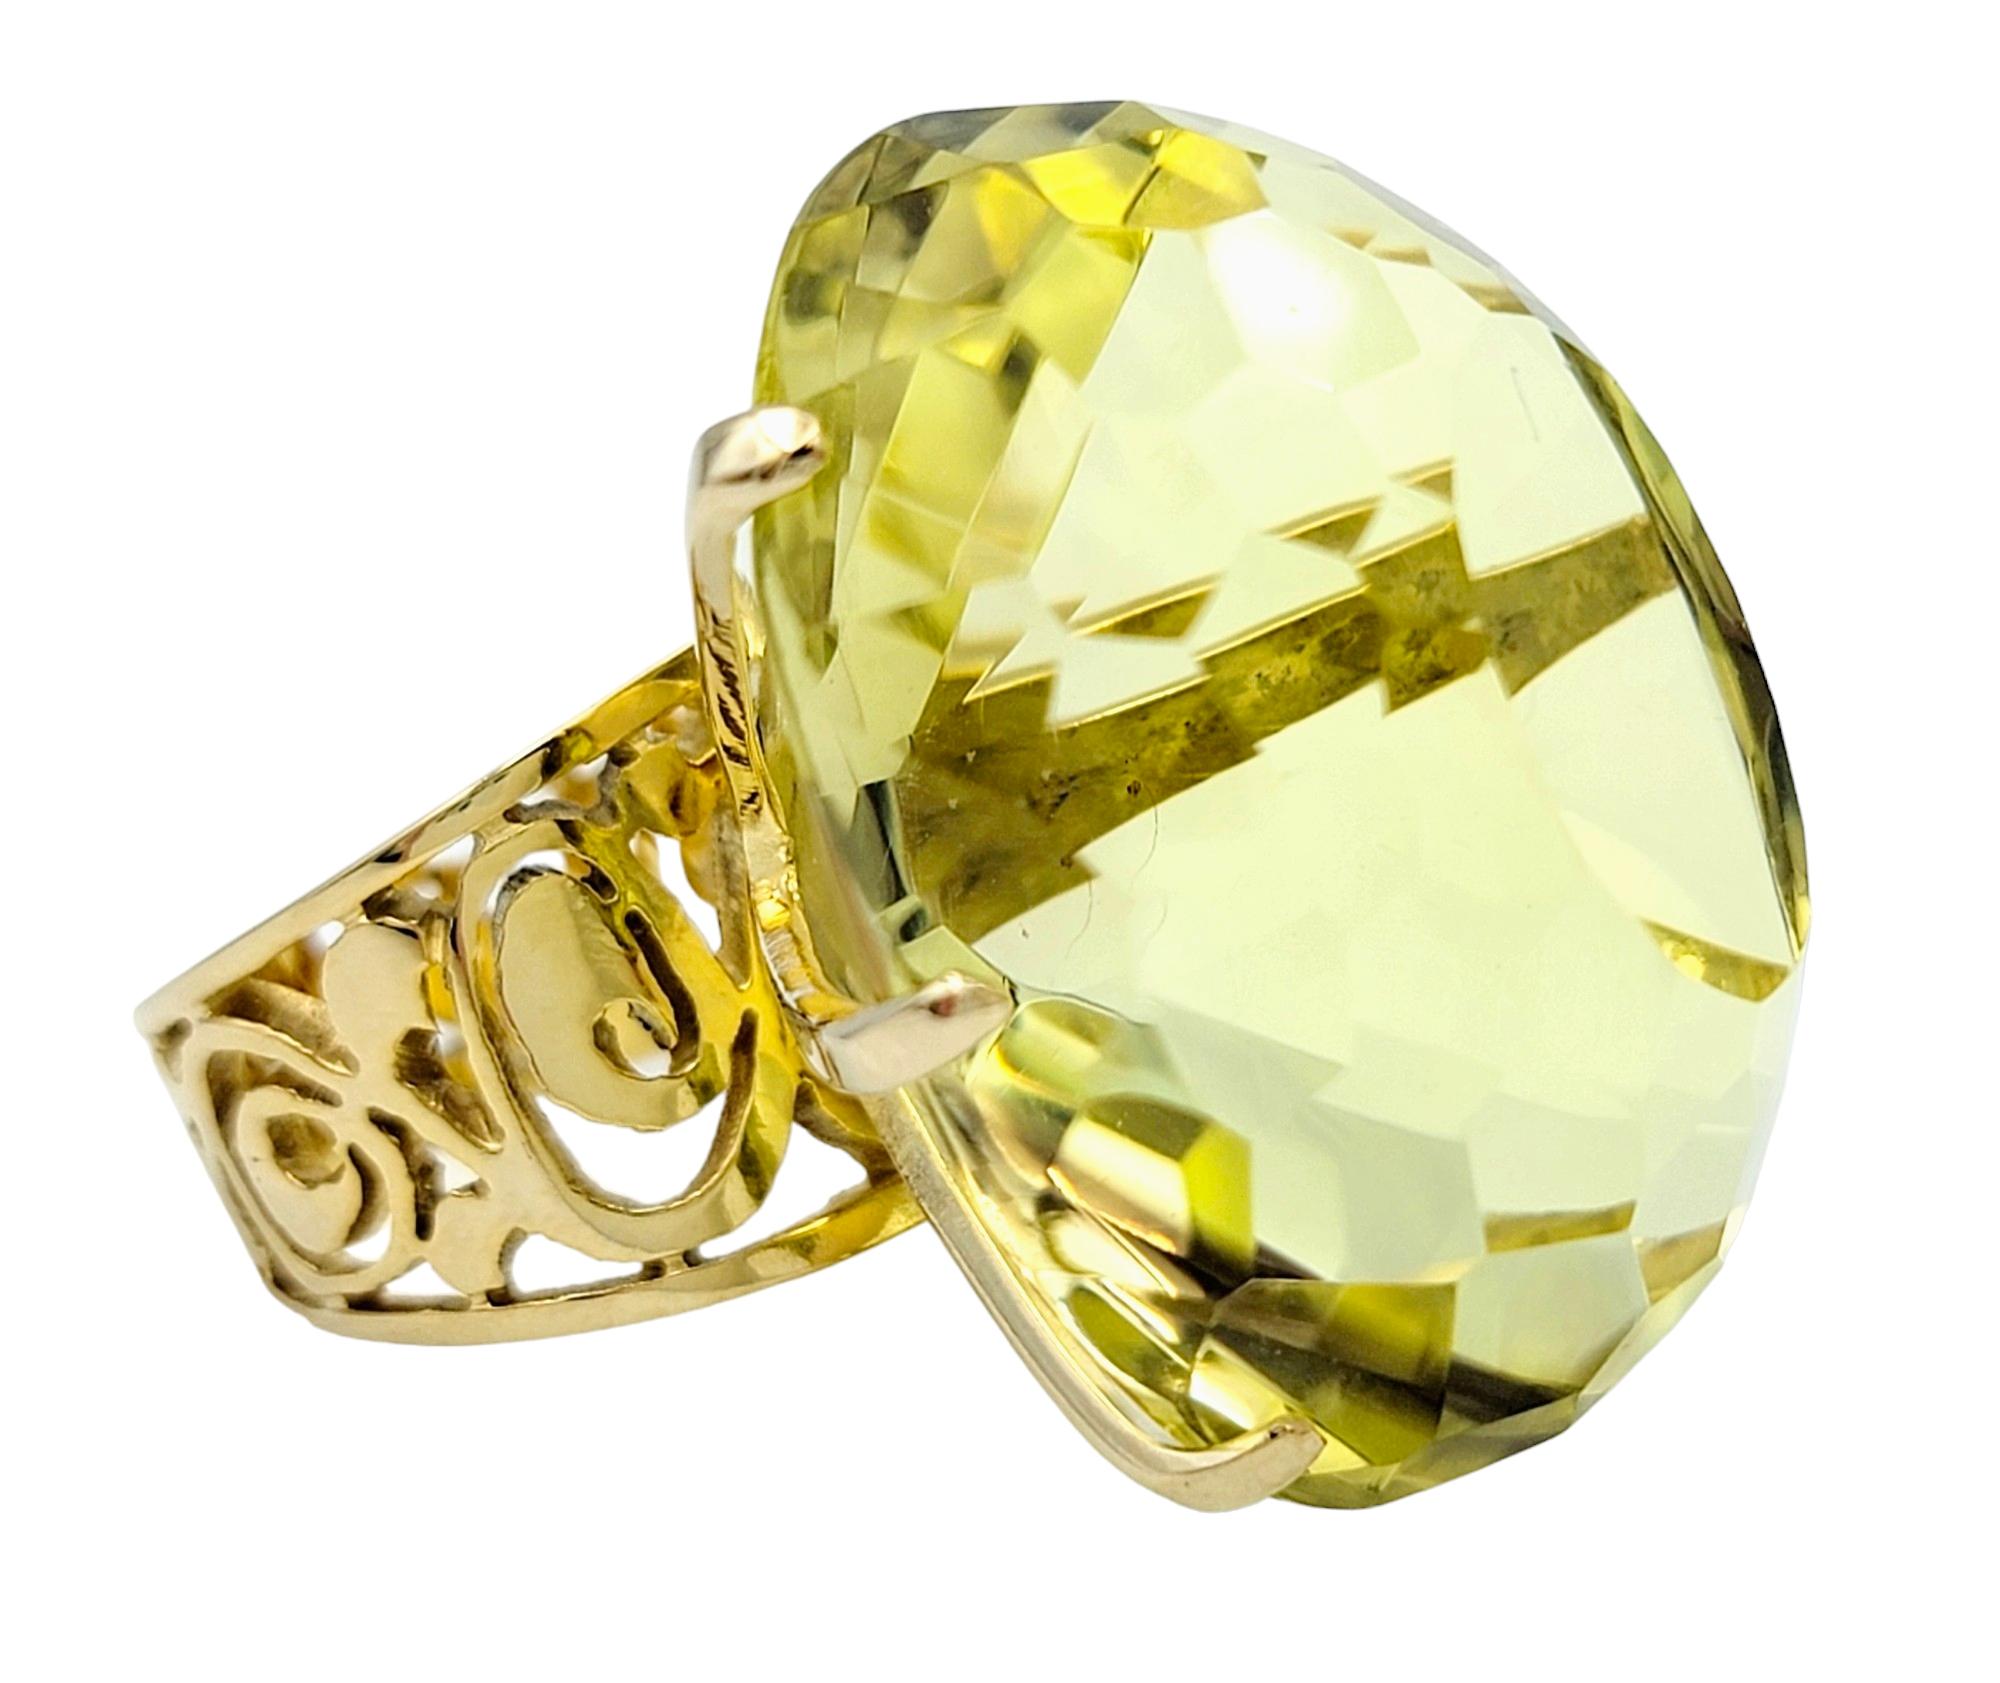 Ring Size: 5.5

This massive high profile citrine ring is a true statement of opulence and bold elegance. A majestic oval-cut citrine, boasting a substantial weight of just over 77 carats, commands attention with its light yellow-greenish hue,